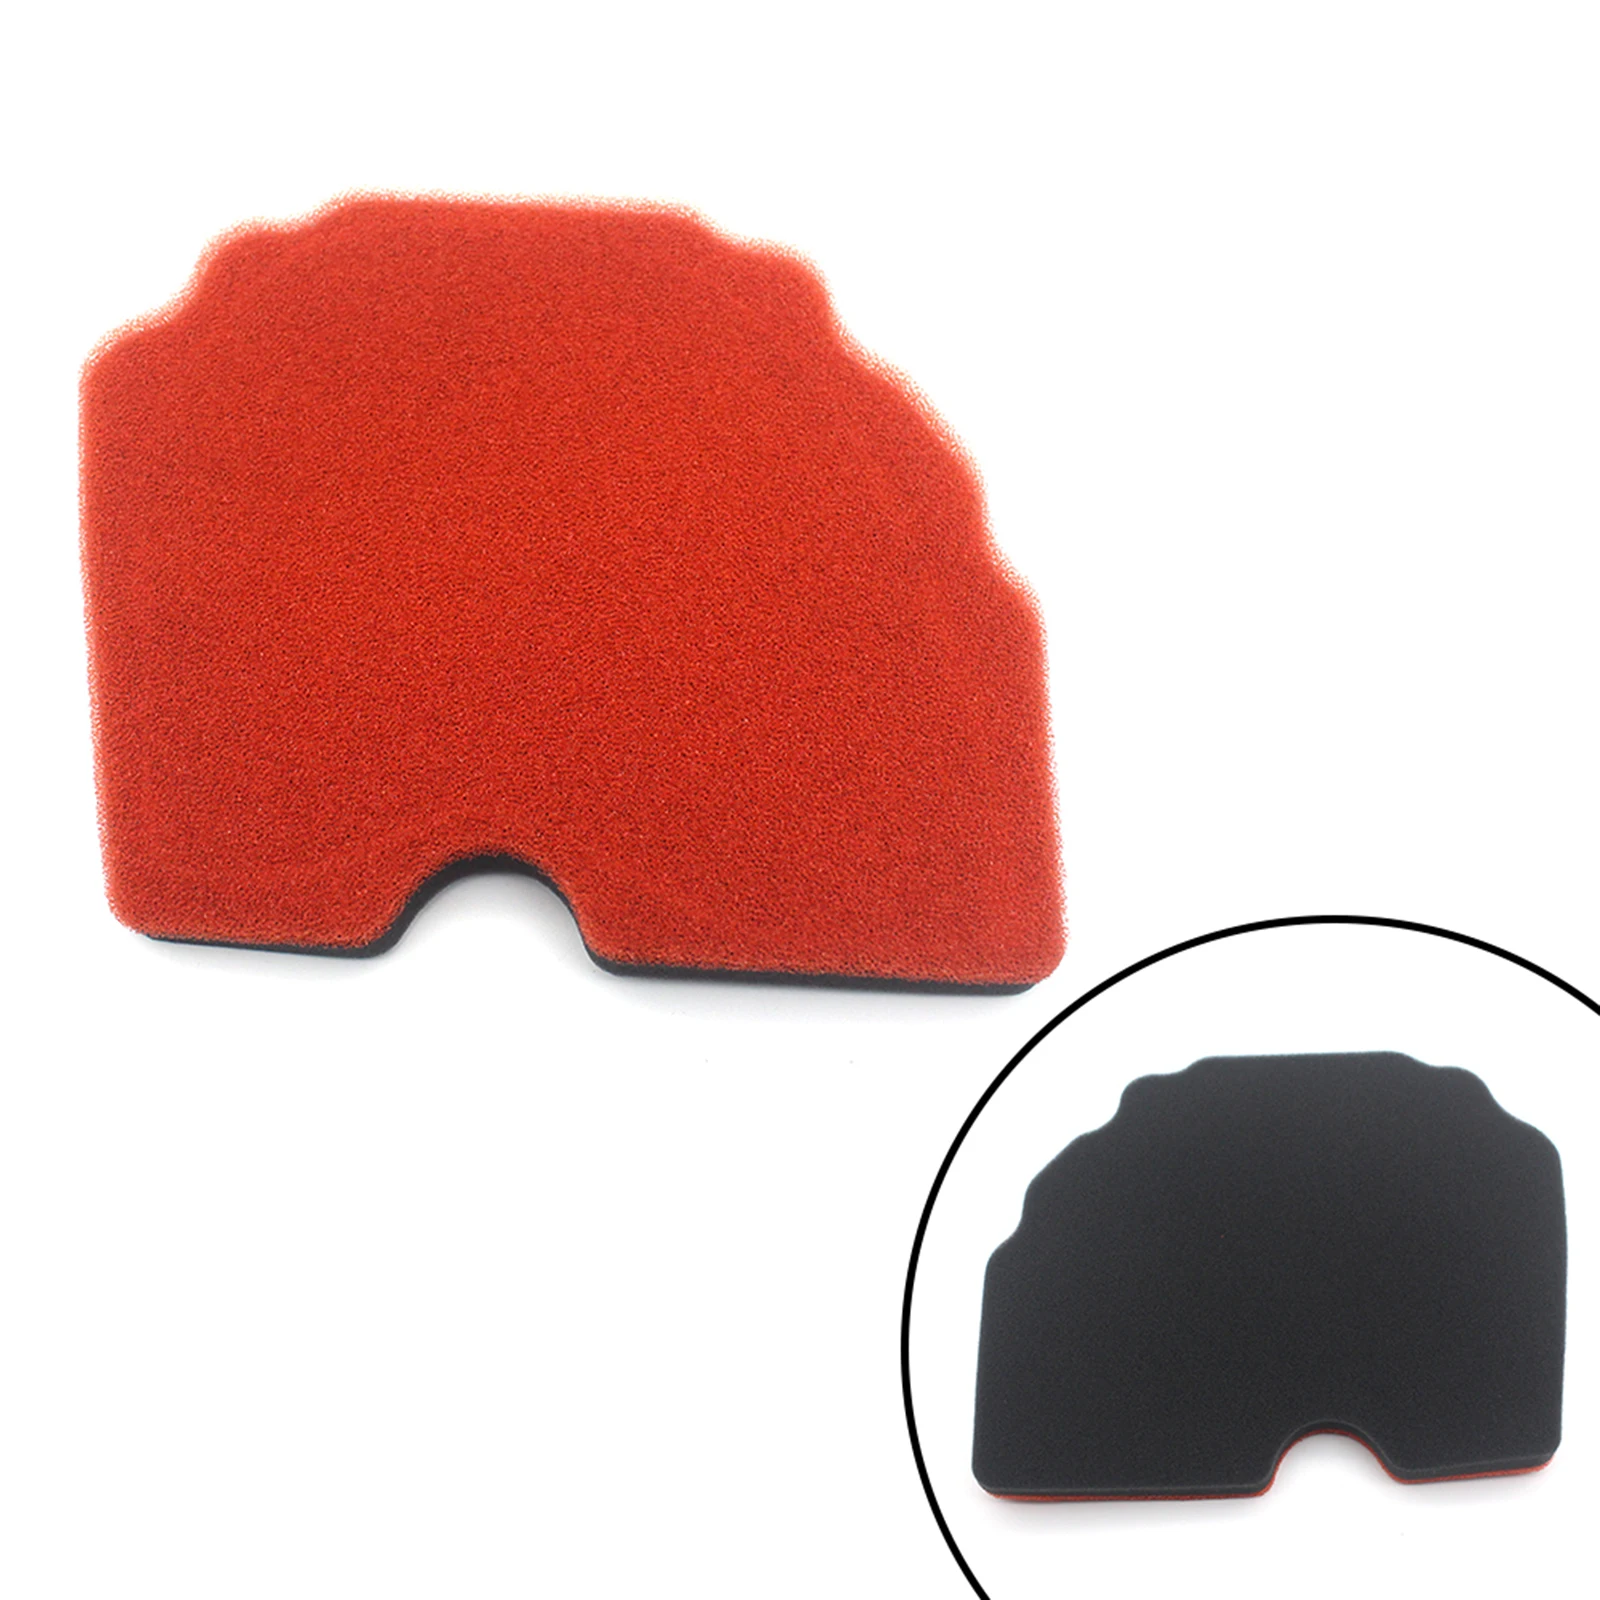 Motorcycle Air Intake Filter Sponge Fit for Benelli TRK502 TRK 502 TRK502X TRK 502X Air Filter Motorbike Cleaner Accessories